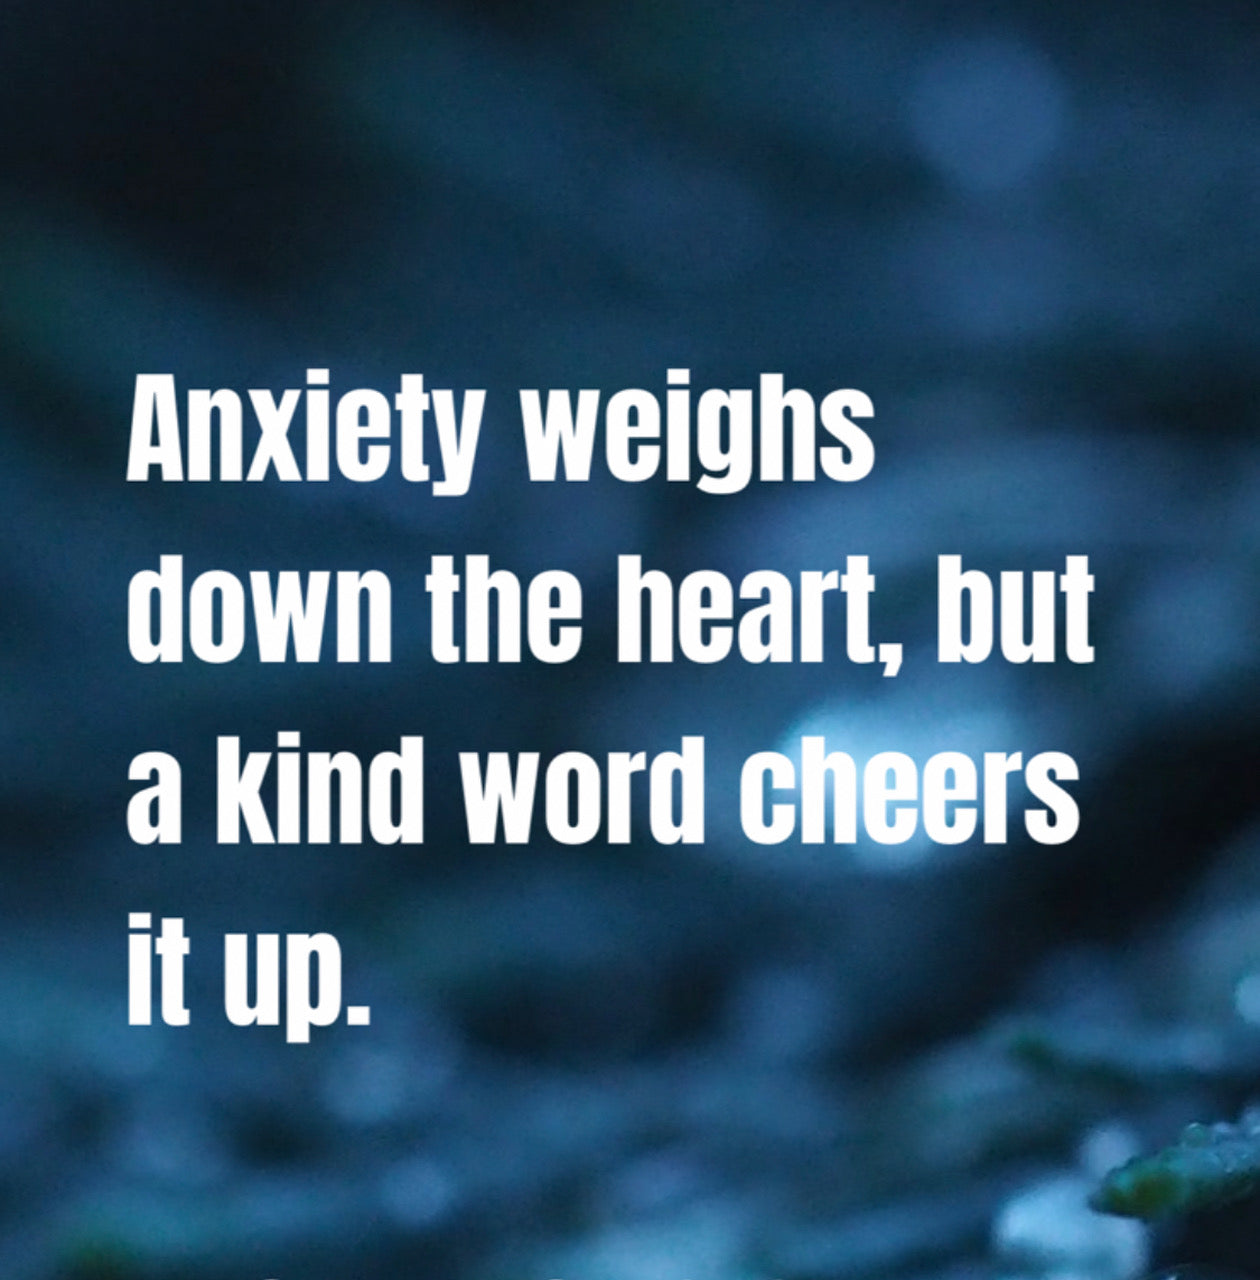 Anxiety Weighs Down The Heart